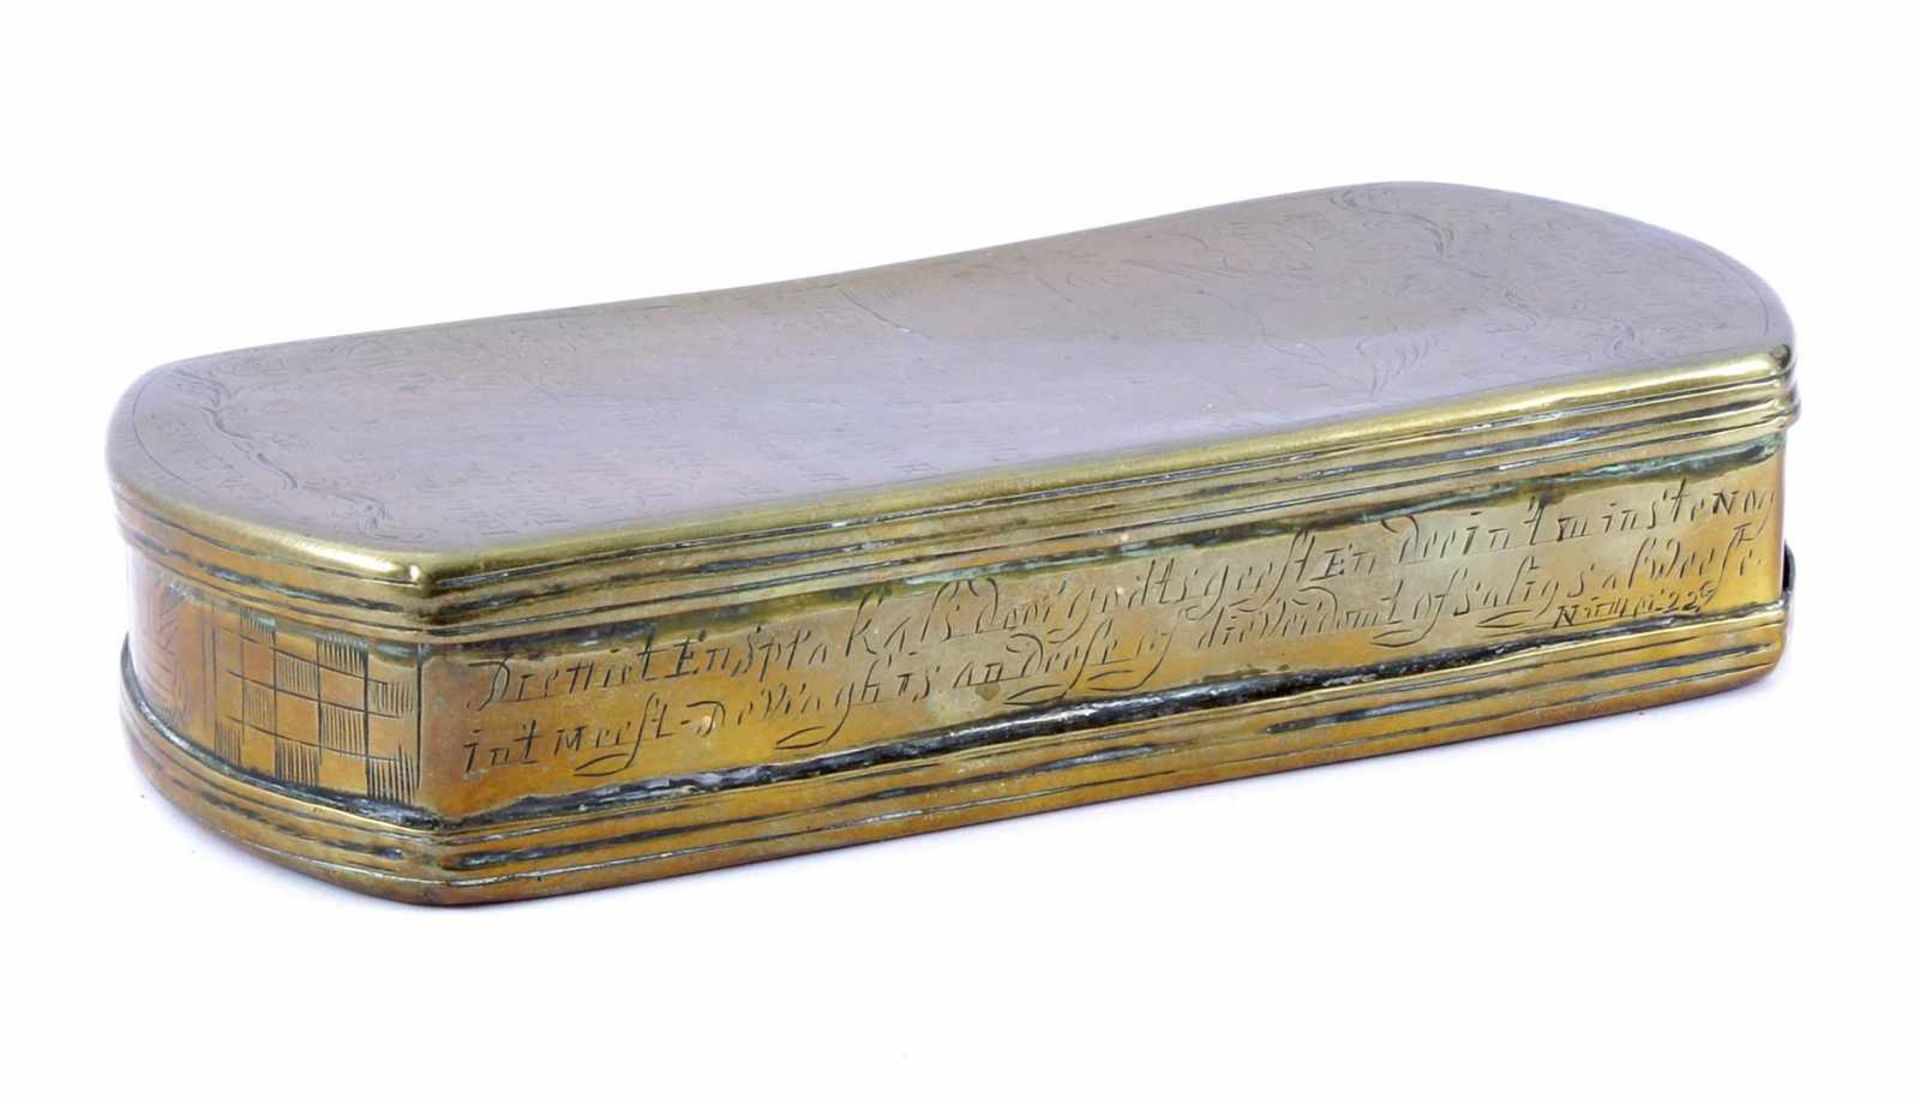 Copper 18th century tobacco box with etched decor and text Matthew 23 verse 37, 3 cm high, 15.7x8